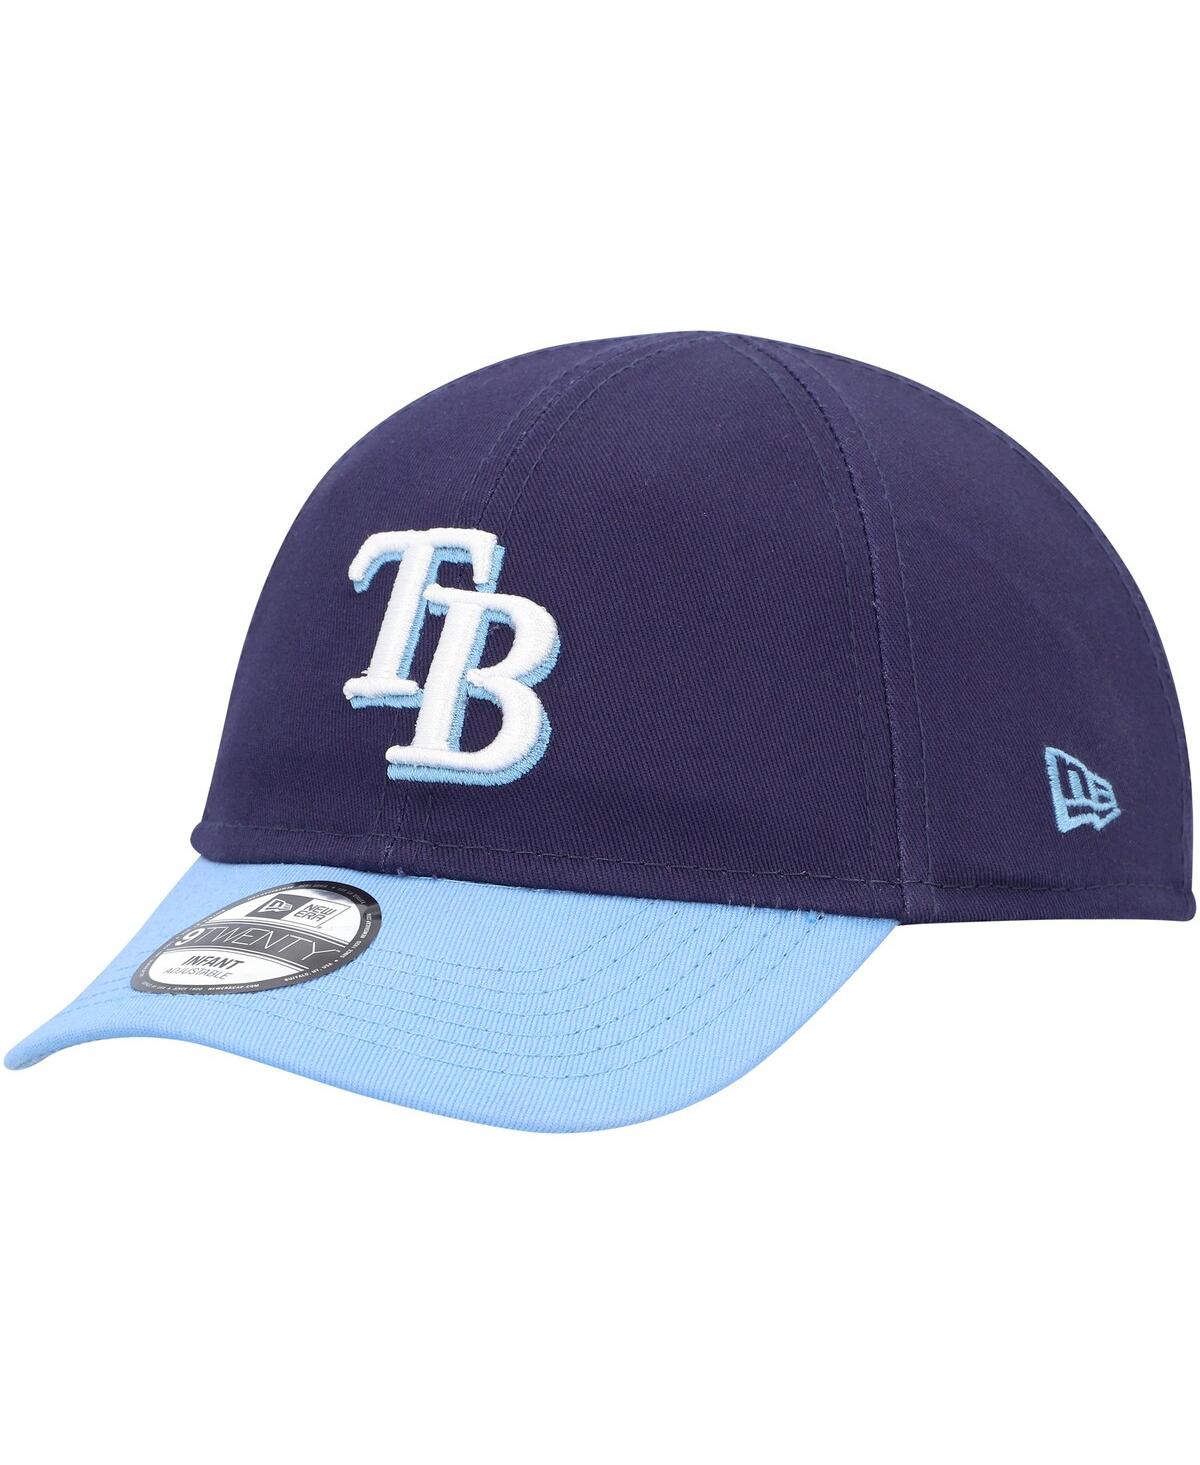 New Era Babies' Infant Boys And Girls  Navy Tampa Bay Rays Team Color My First 9twenty Flex Hat